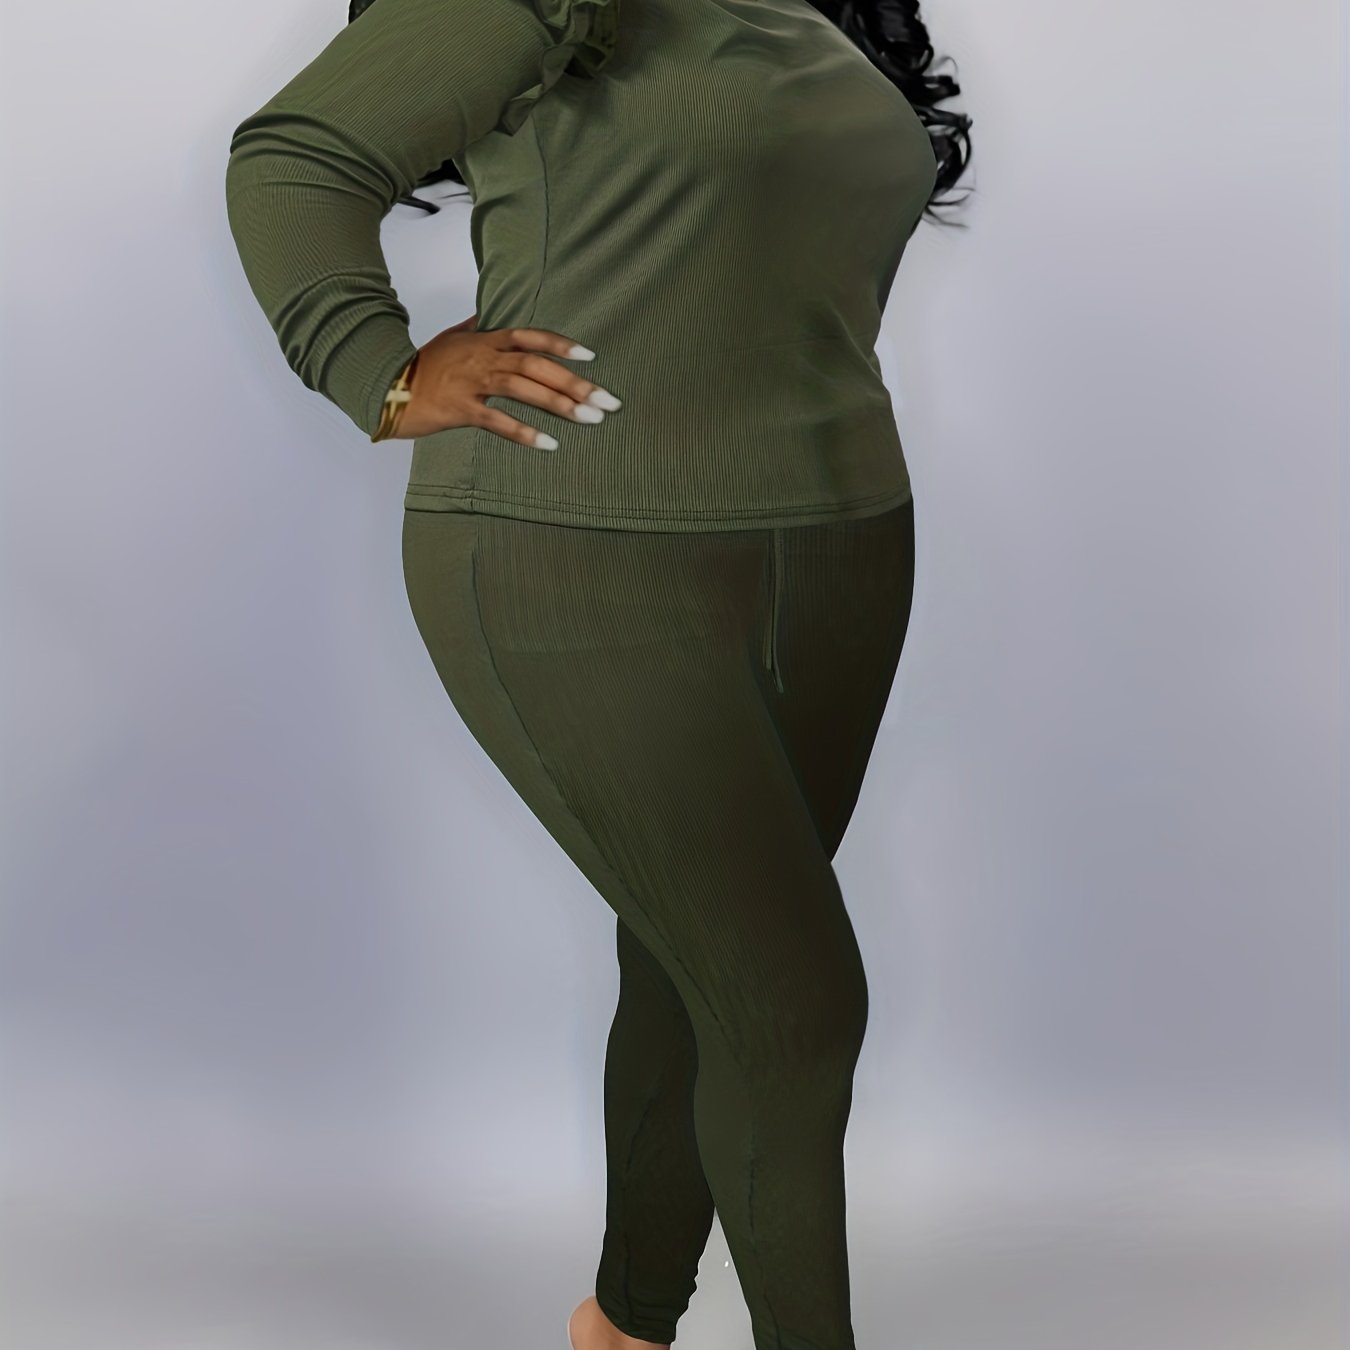 Plus Size Women Clothing Dress and Pants Sets Long Top and Leggings Pockets  Solid Two Piece